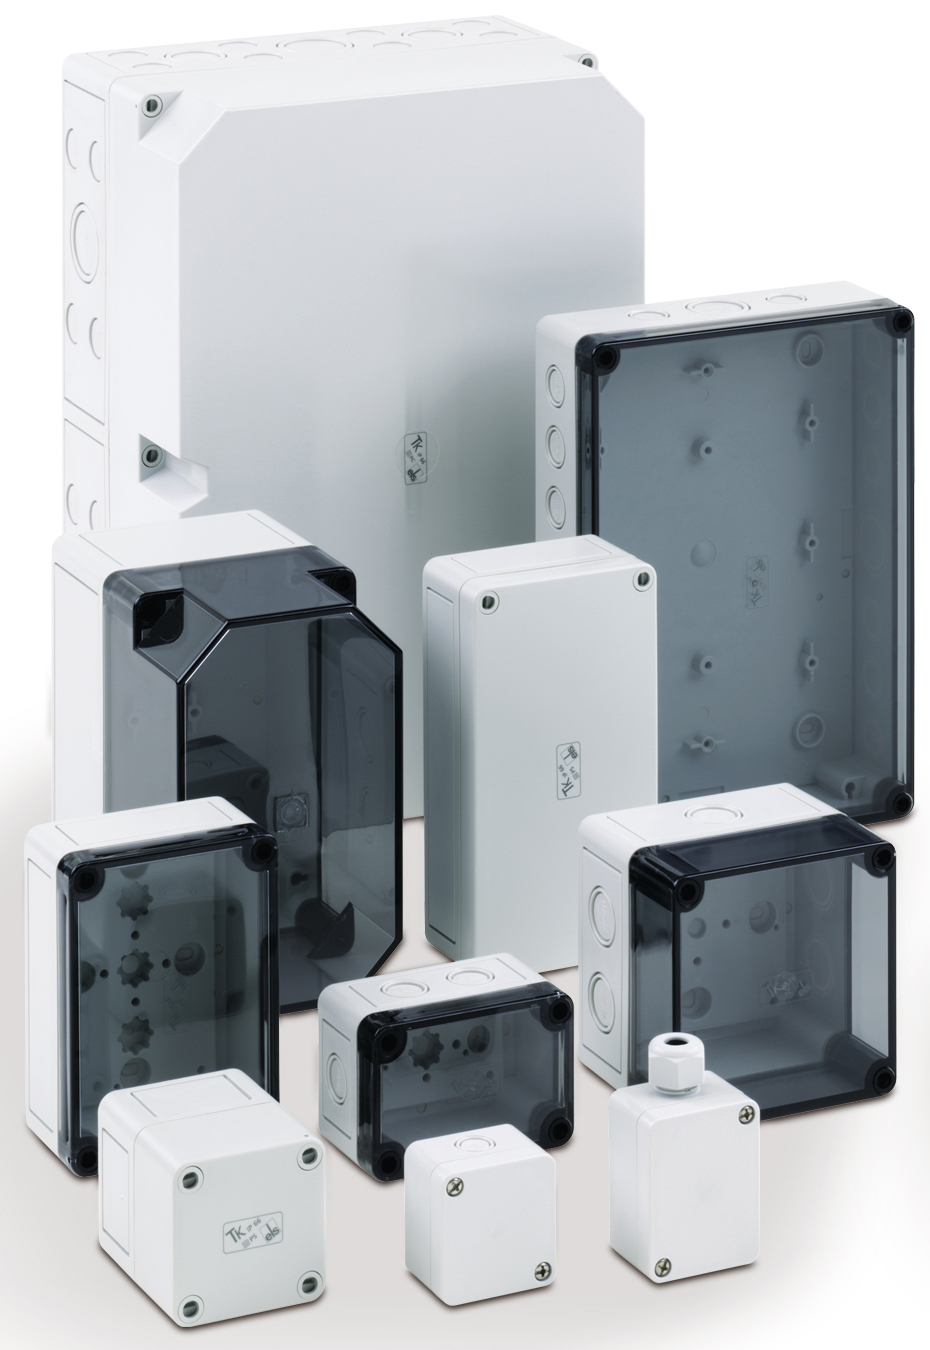 TK series includes a comprehensive selection of accessories, which can be used to outfit each enclosure exactly as you need.